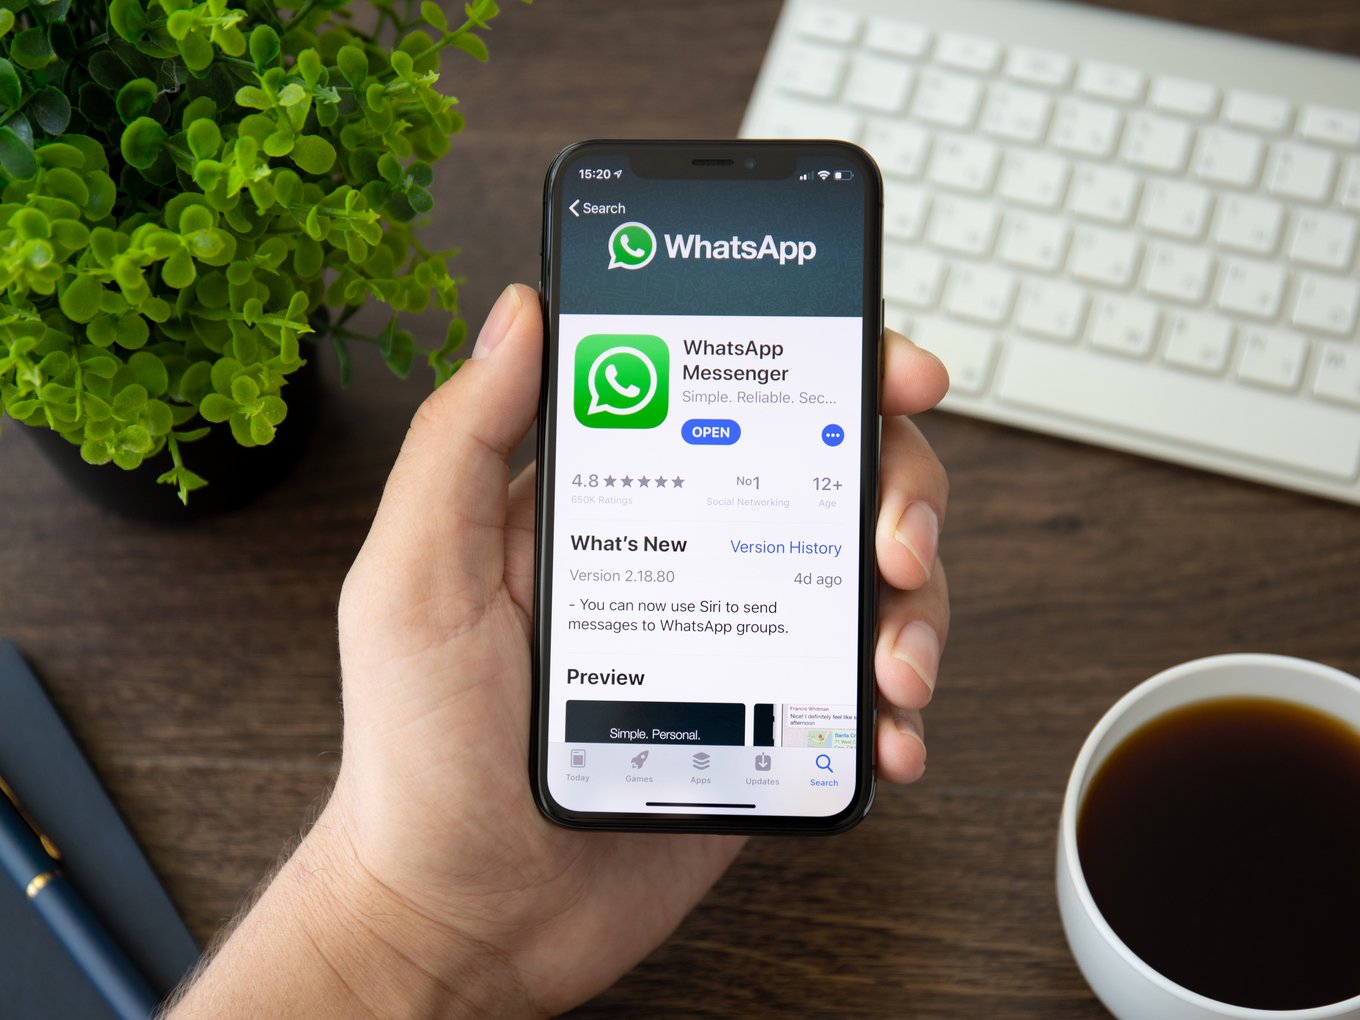 Political Messages Make Up A Major Portion Of WhatsApp’s Verification Requests